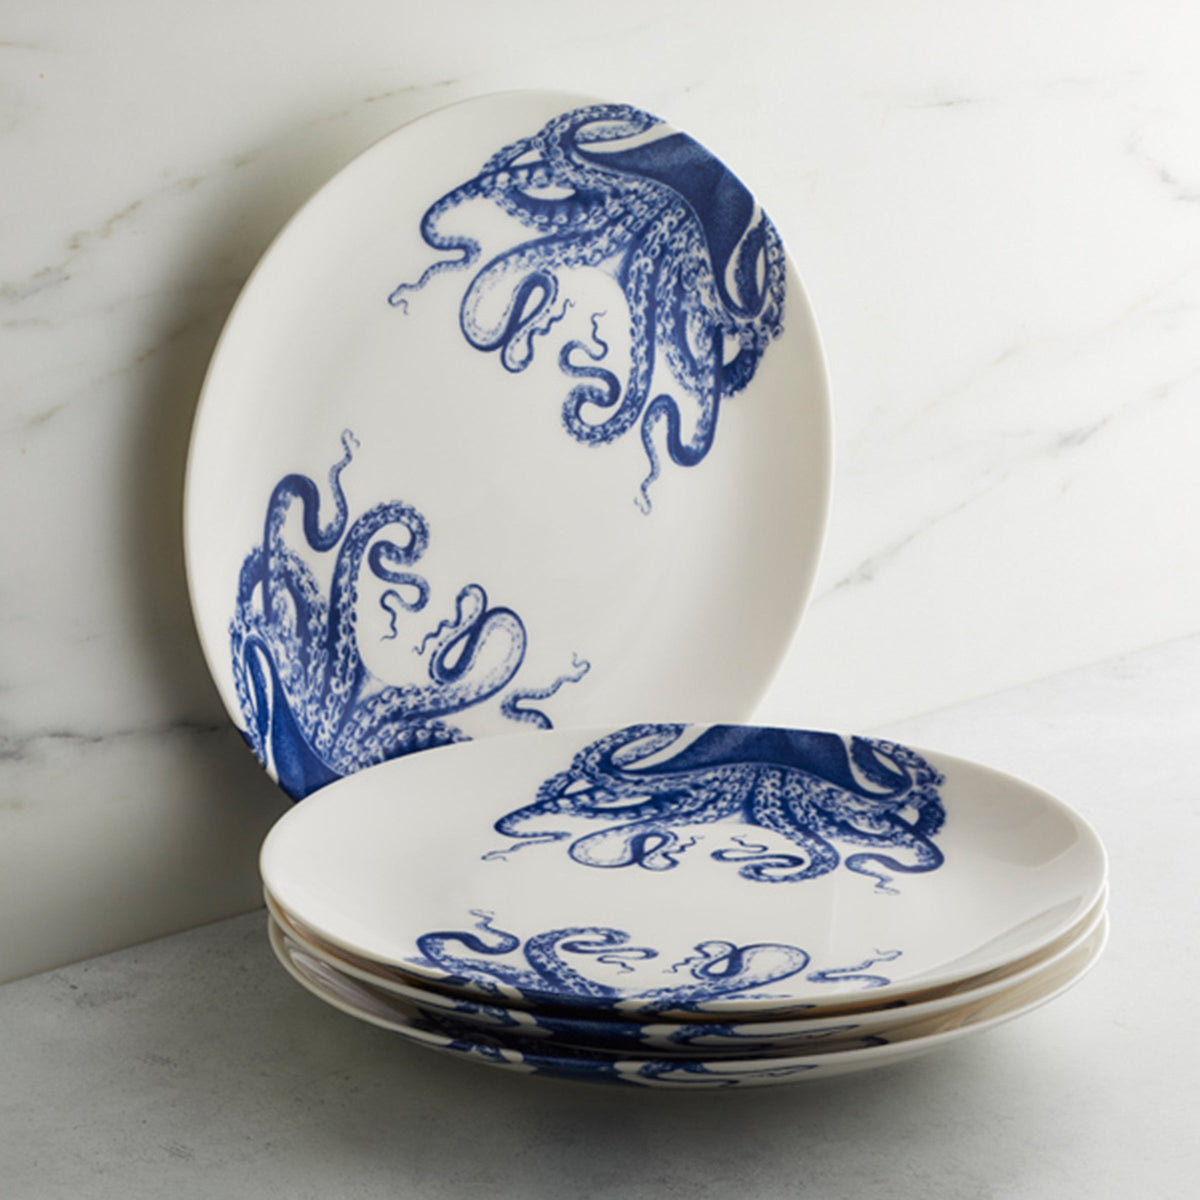 Four creamy white premium Lucy Coupe Dinner Plates from Caskata Artisanal Home, featuring Lucy the octopus, are stacked neatly on a light surface, with a standing fifth plate showcasing the playful design in the background.